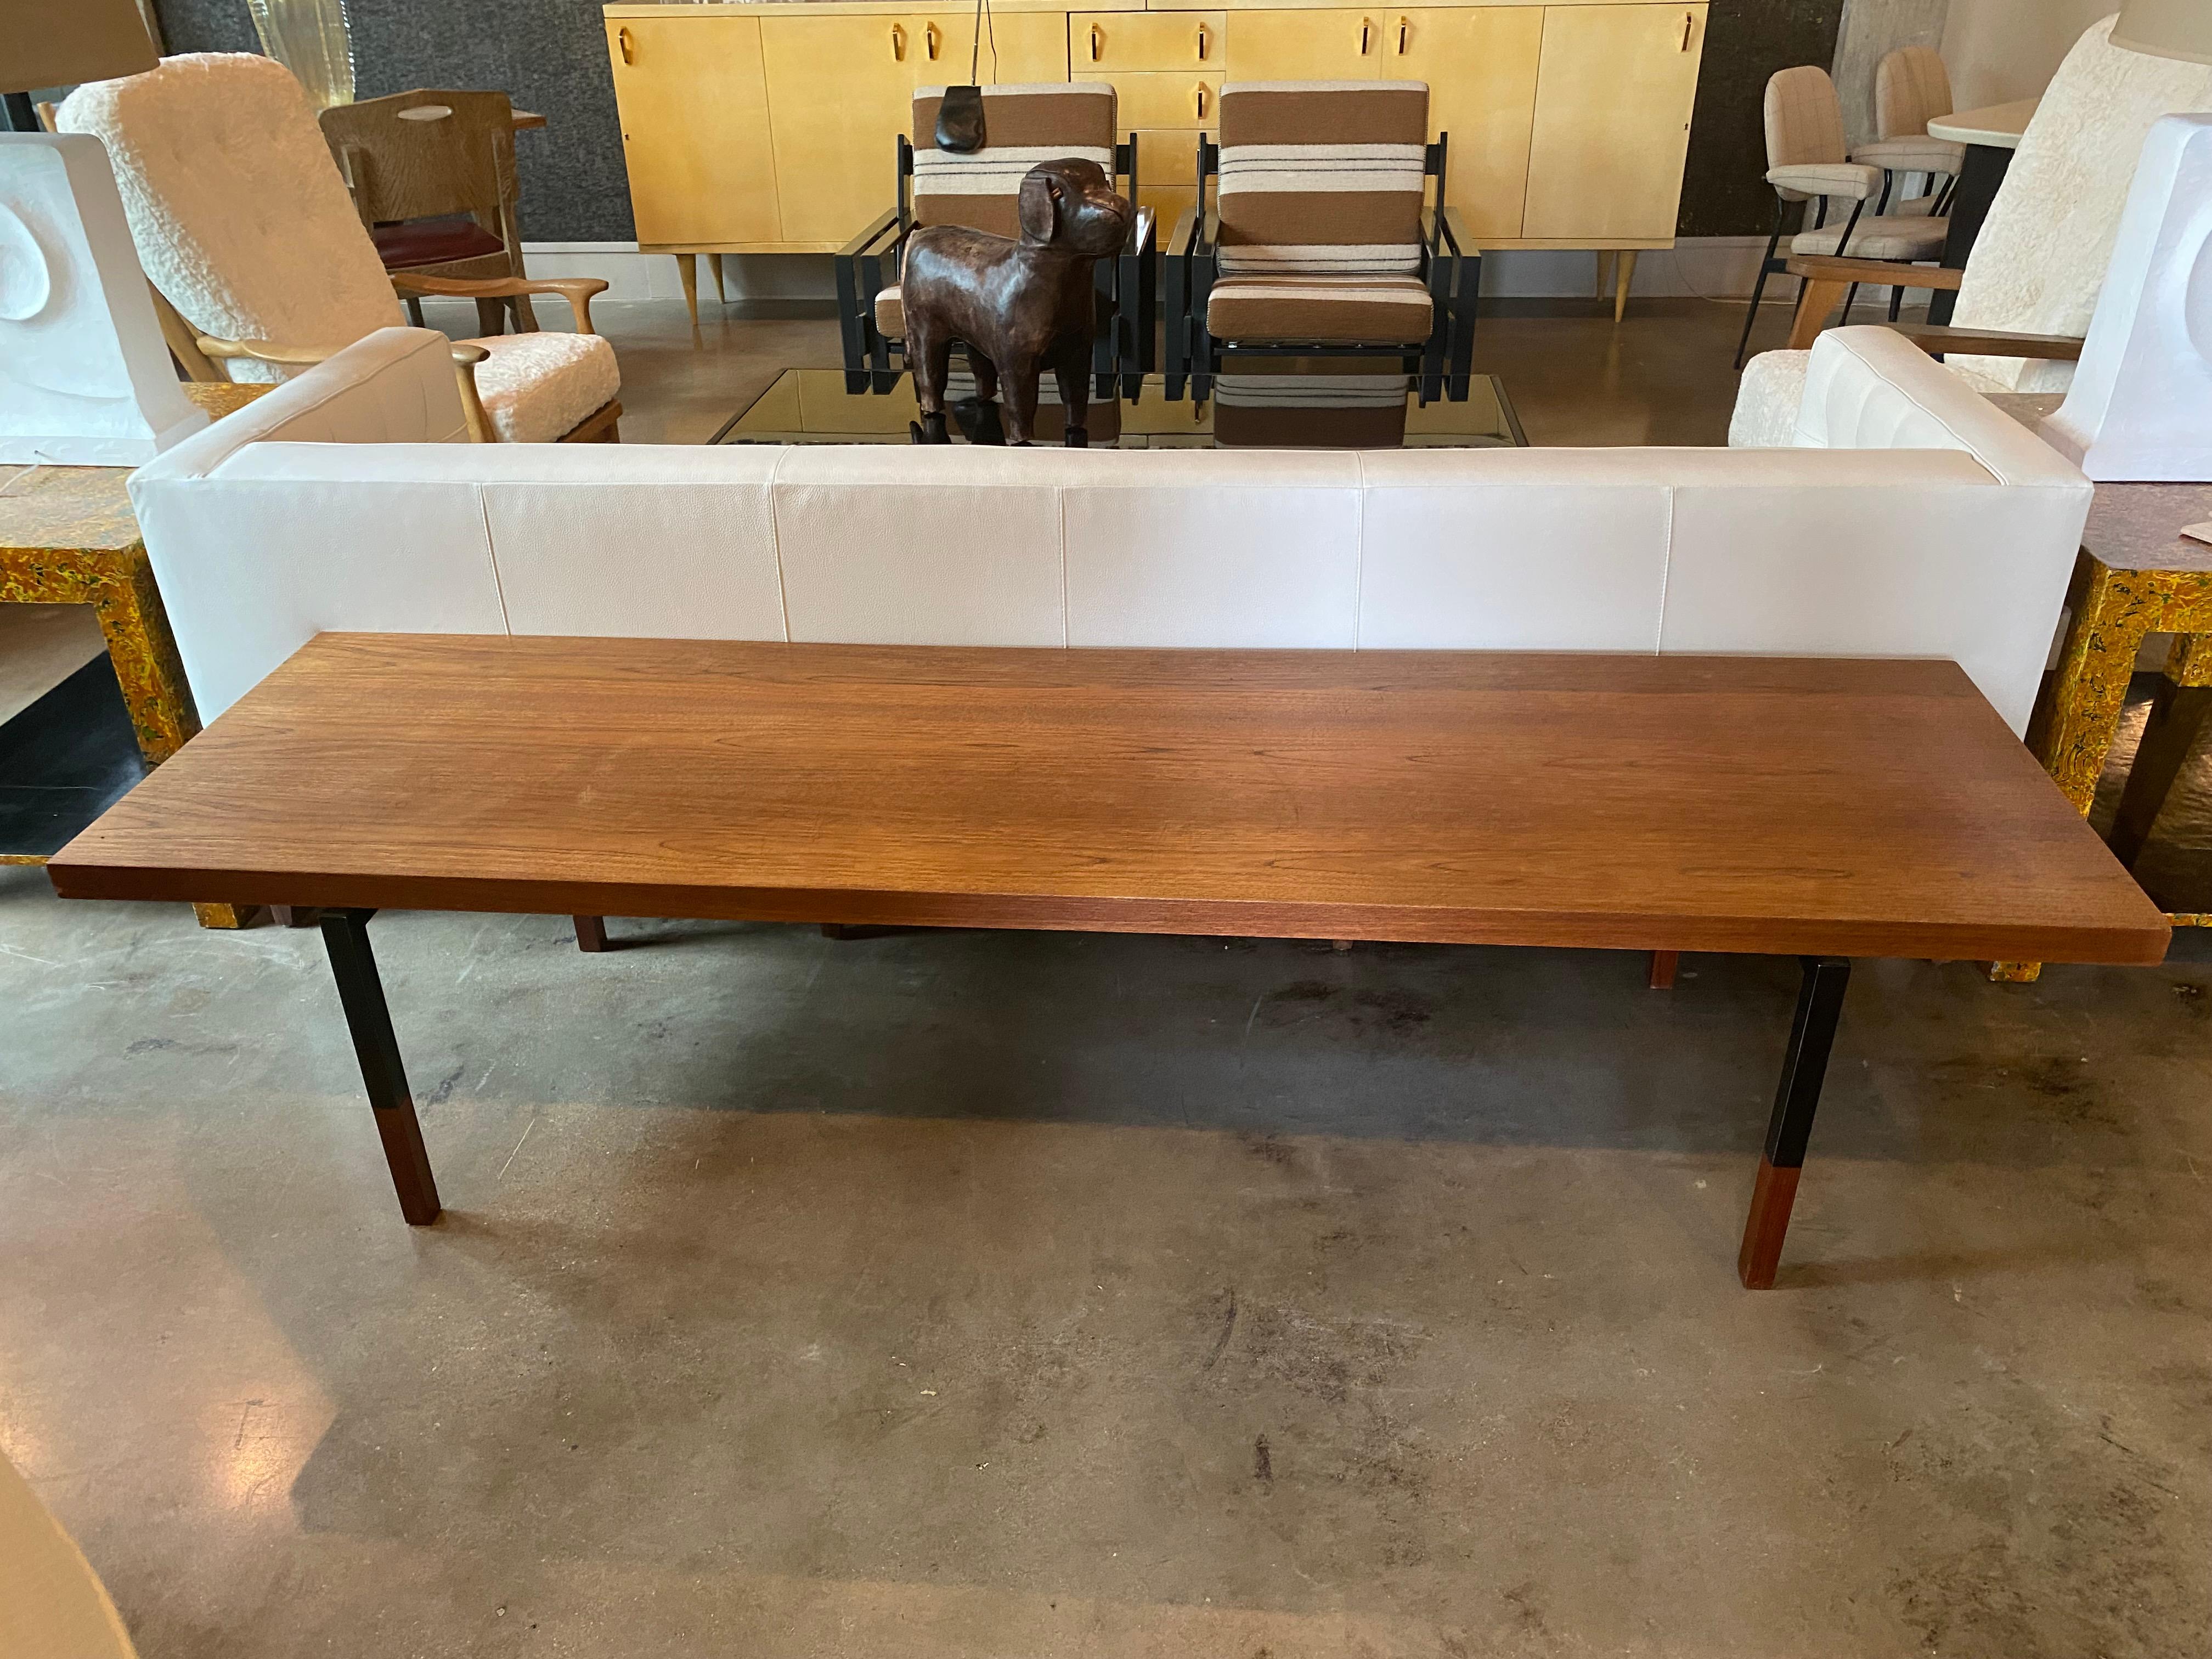 Mid-Century Modern Wood and Steel Mid-Century Table or Bench, Denmark, 1950's For Sale